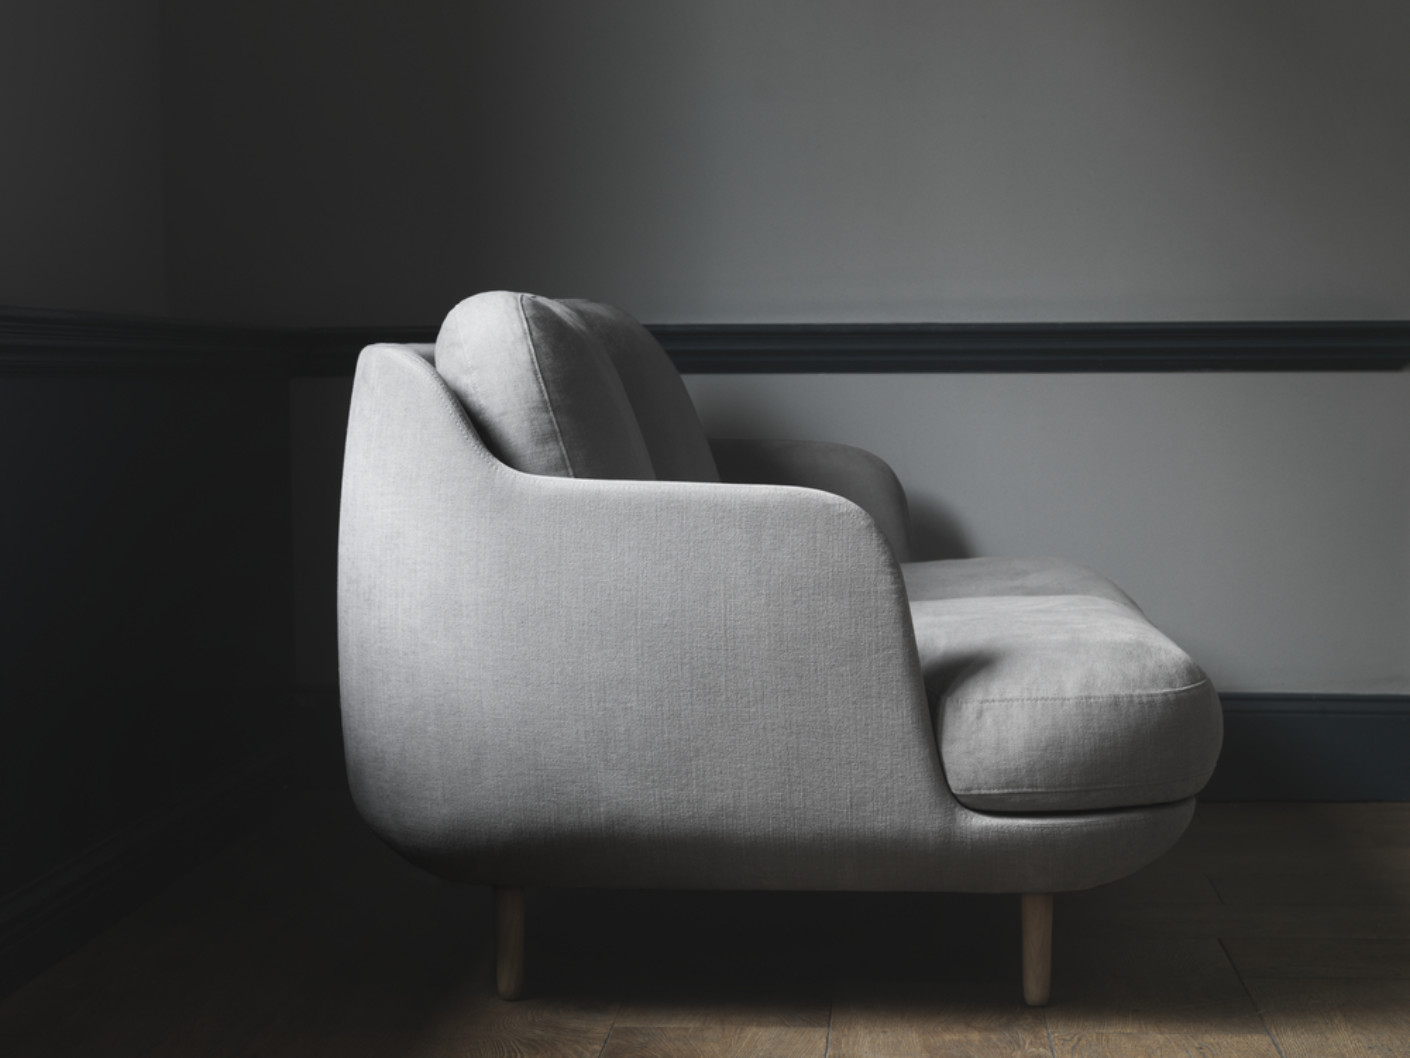 Lune Sofa Collection by Jaime Hayon for Fritz Hansen